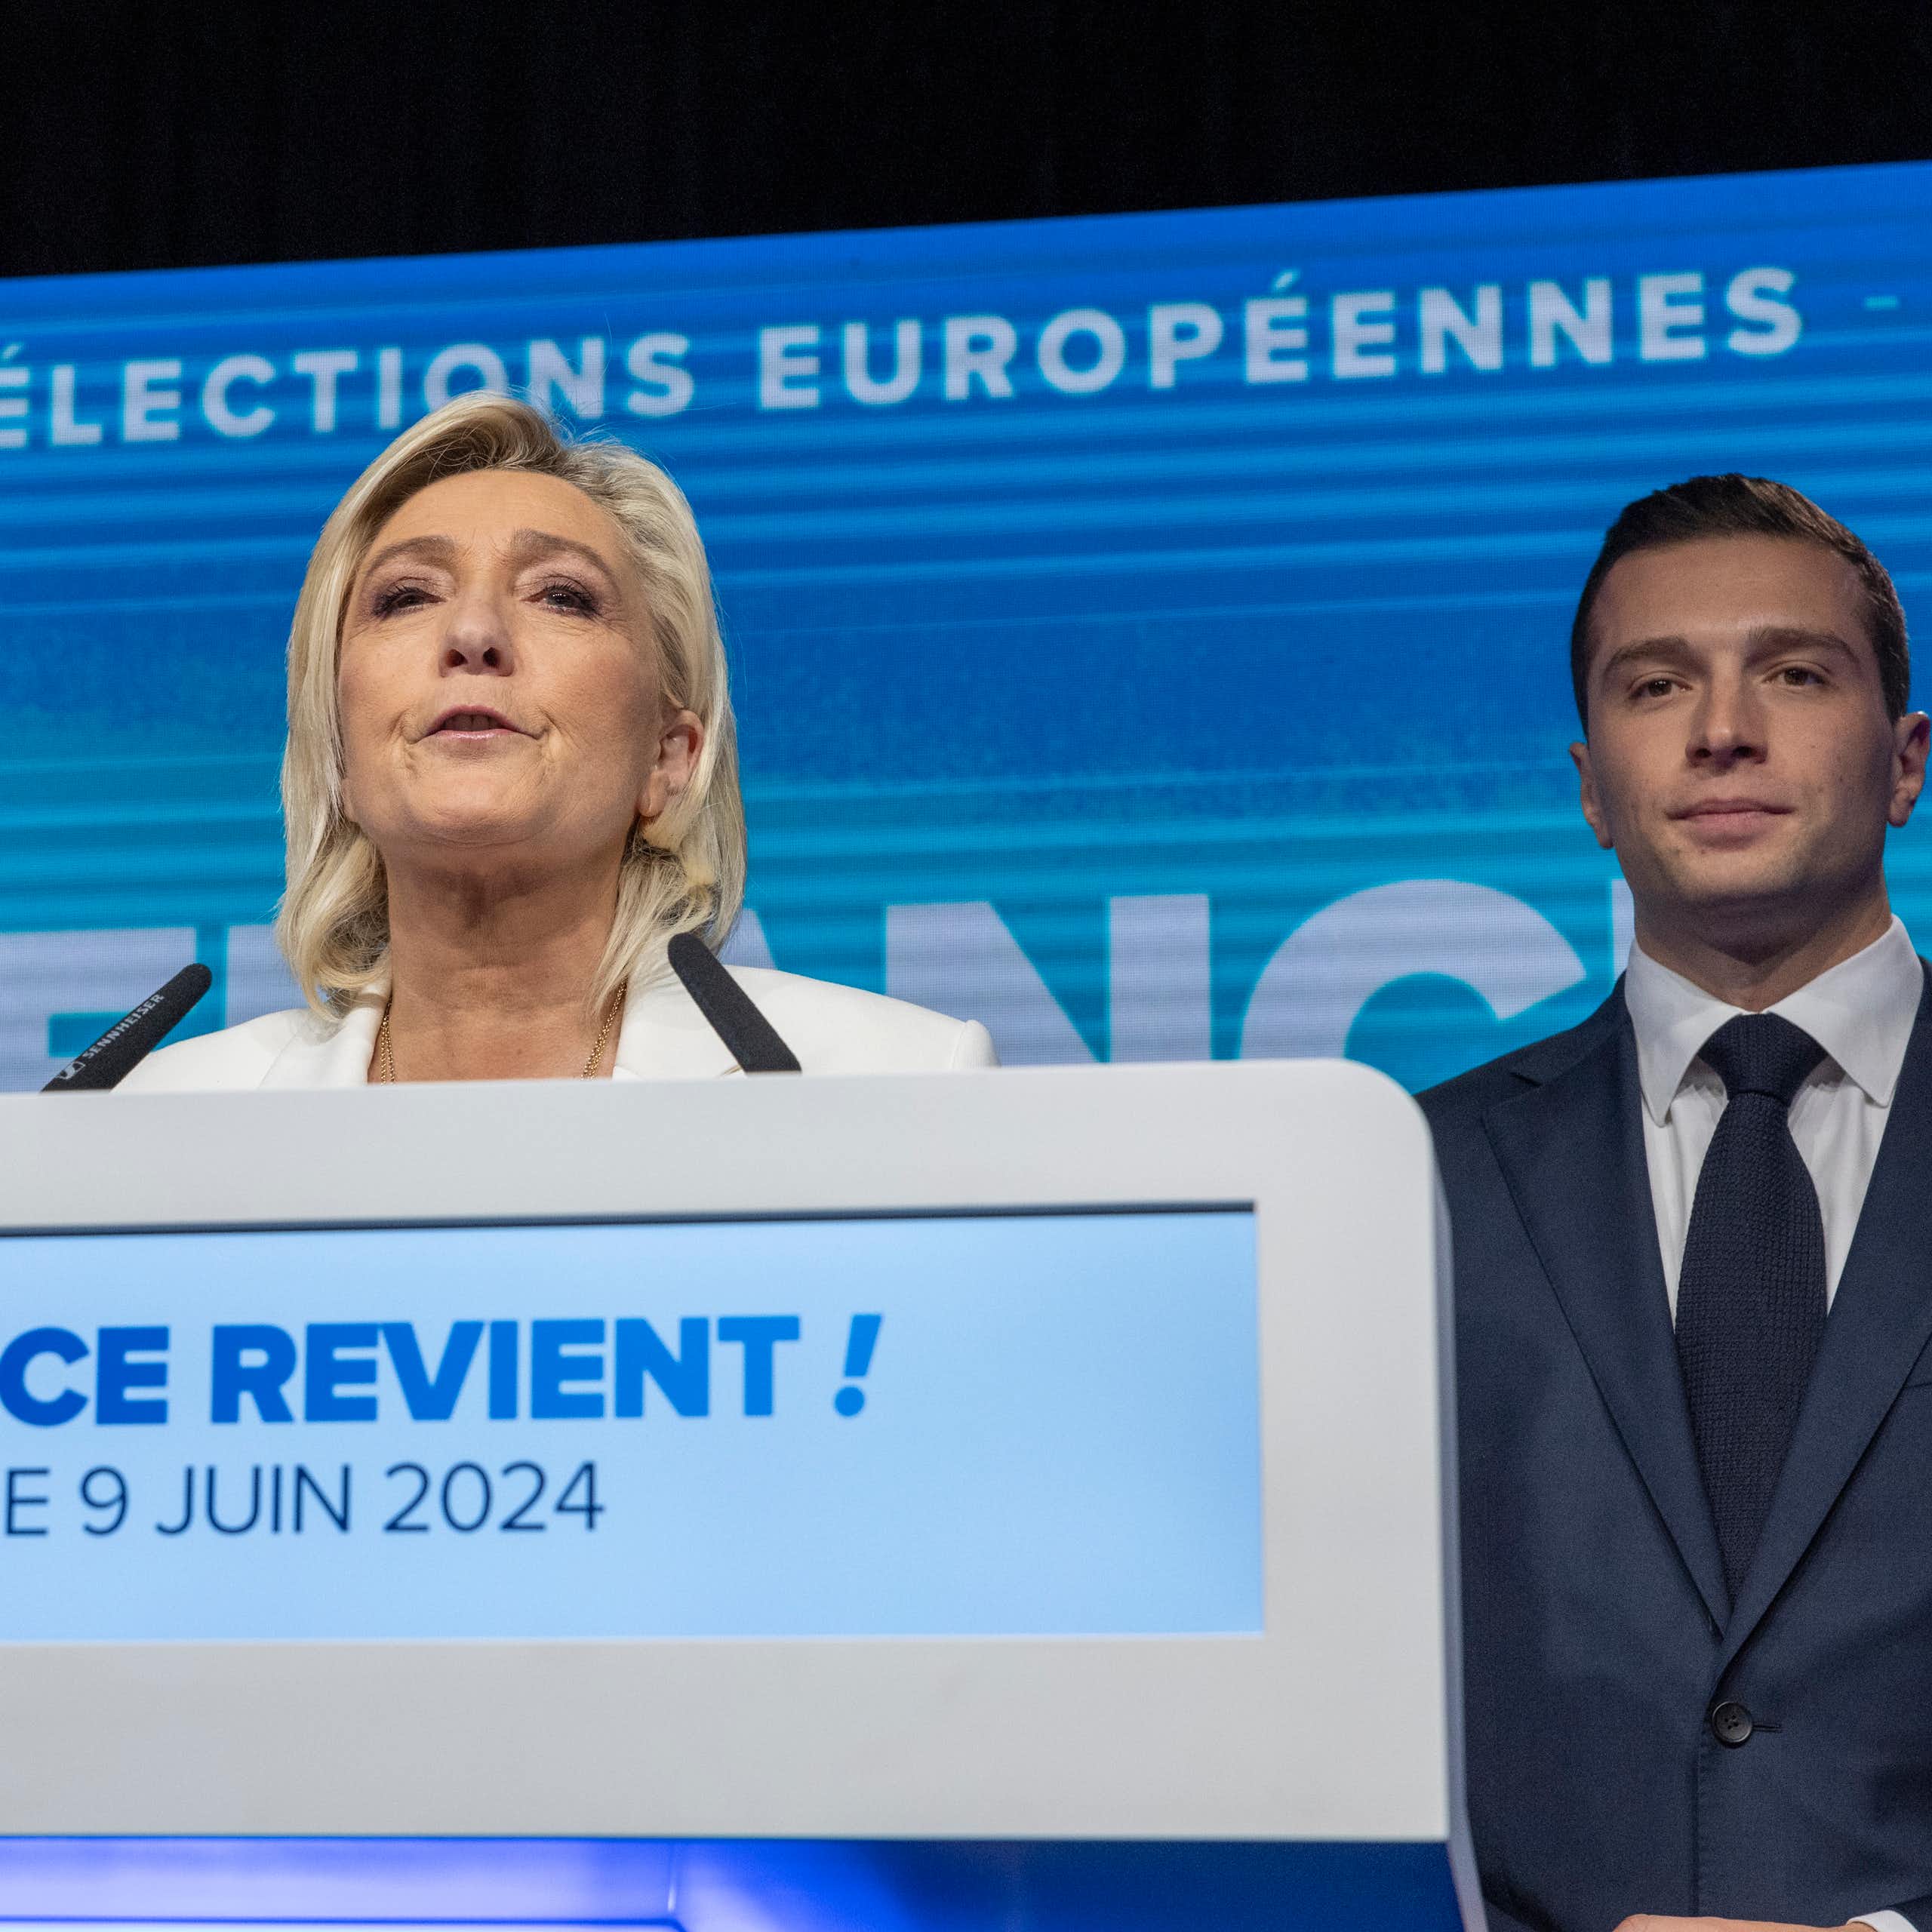 Marine Le Pen delivering a speech while a man in a suit stands in the background smiling.